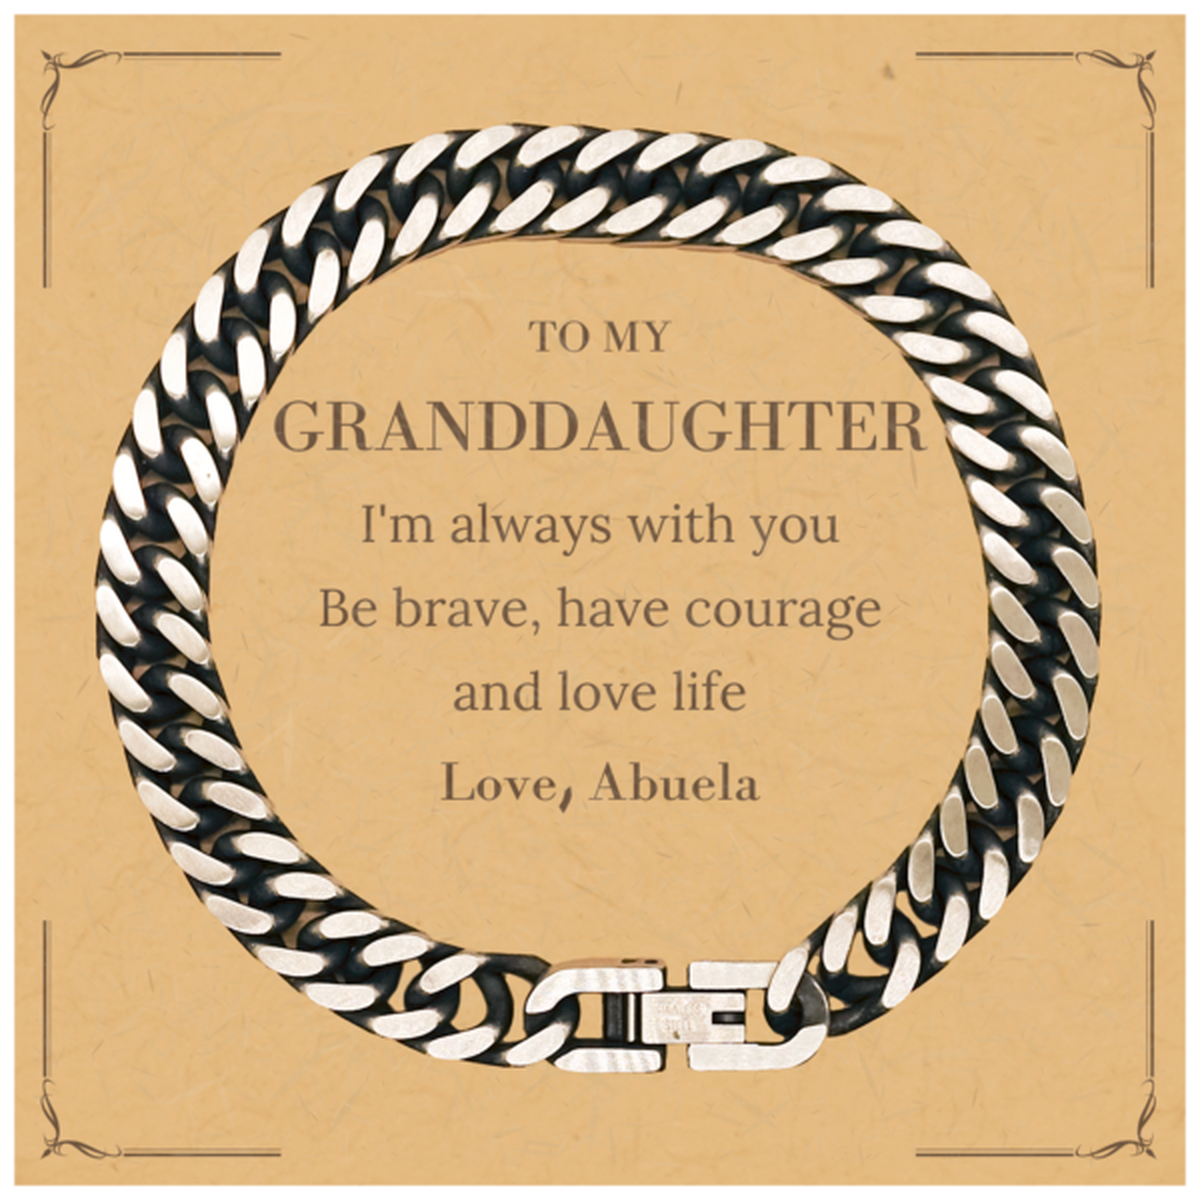 To My Granddaughter Gifts from Abuela, Unique Cuban Link Chain Bracelet Inspirational Christmas Birthday Graduation Gifts for Granddaughter I'm always with you. Be brave, have courage and love life. Love, Abuela